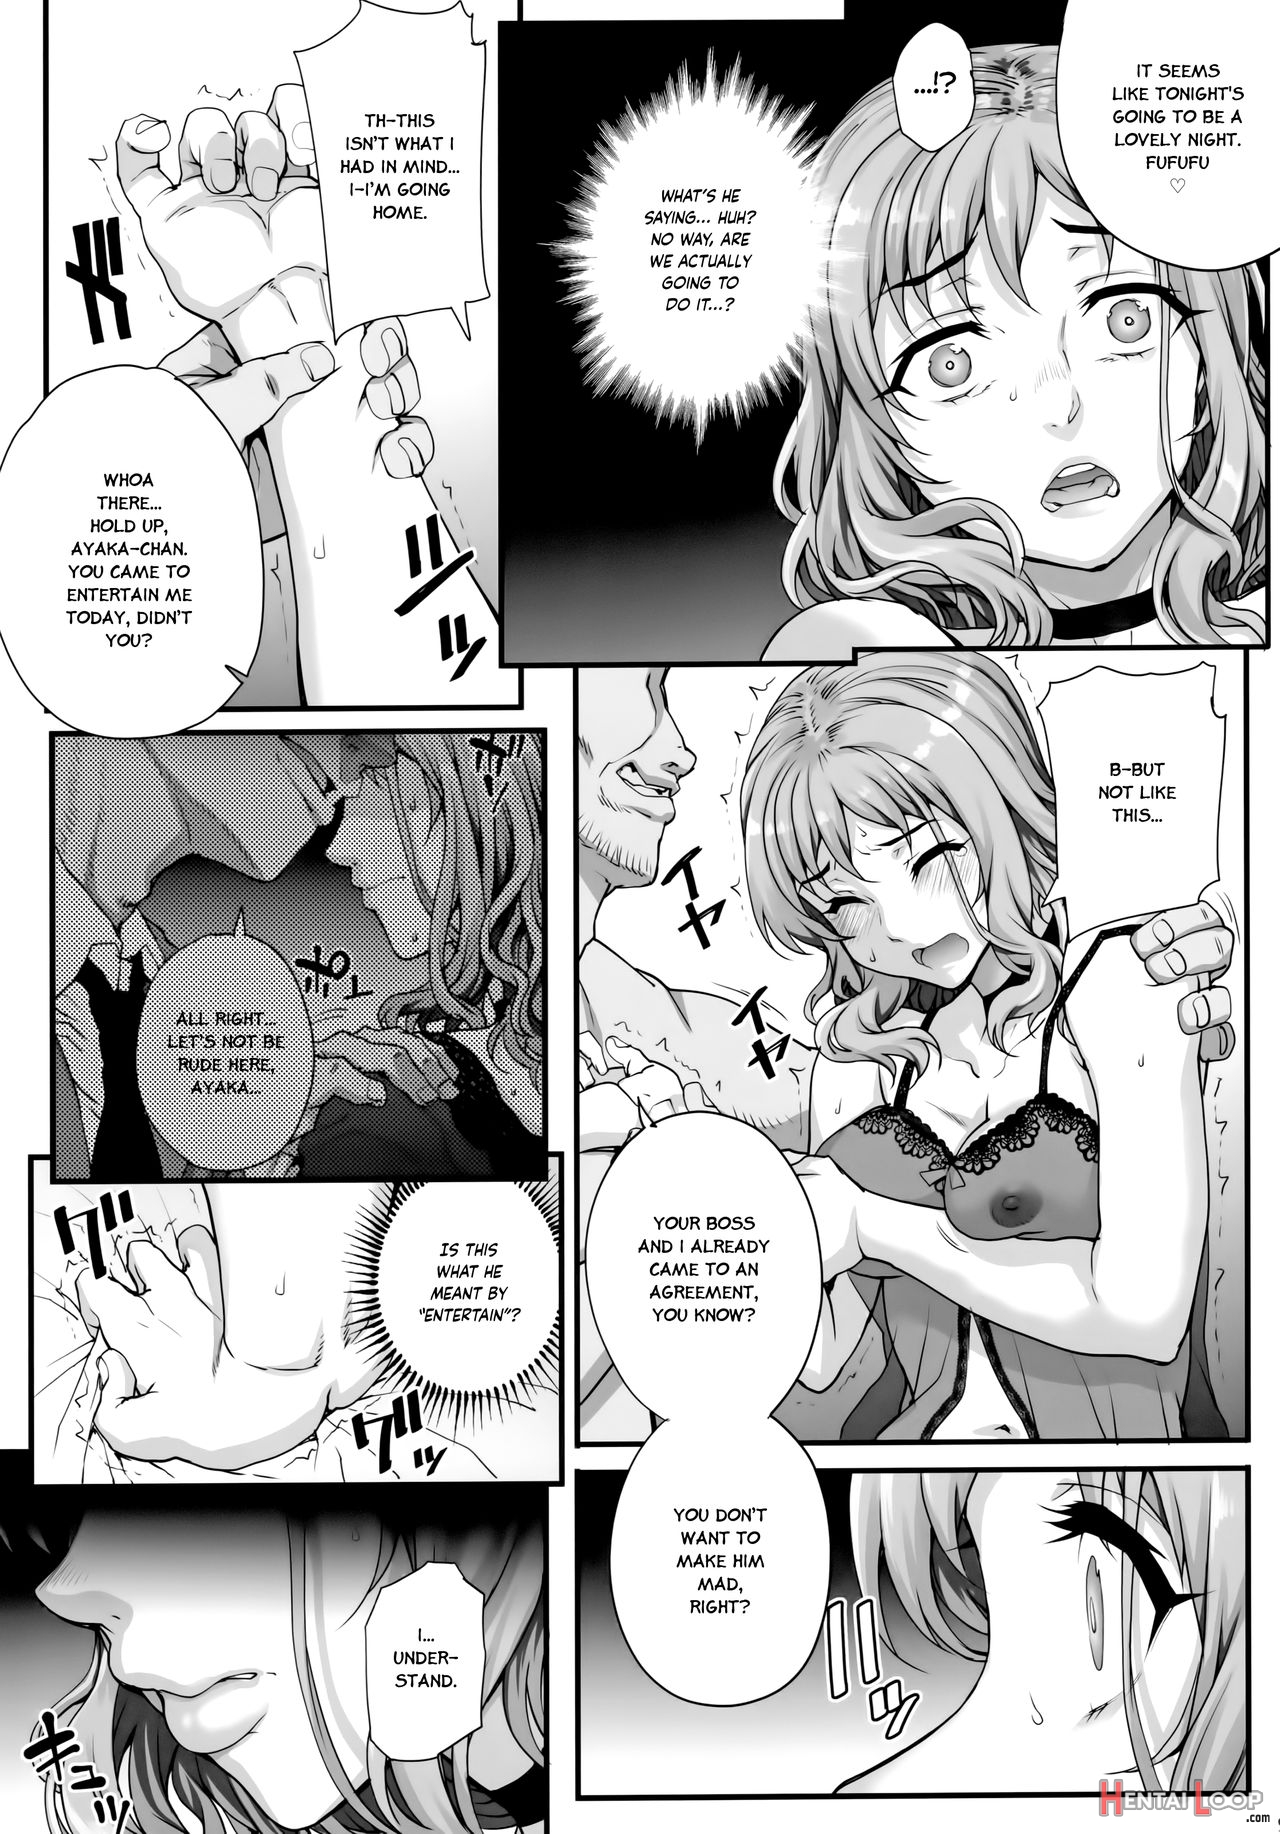 Keep This A Secret From My Boyfriend 3 - I Was Forced To... Sexually Entertain Him. page 10